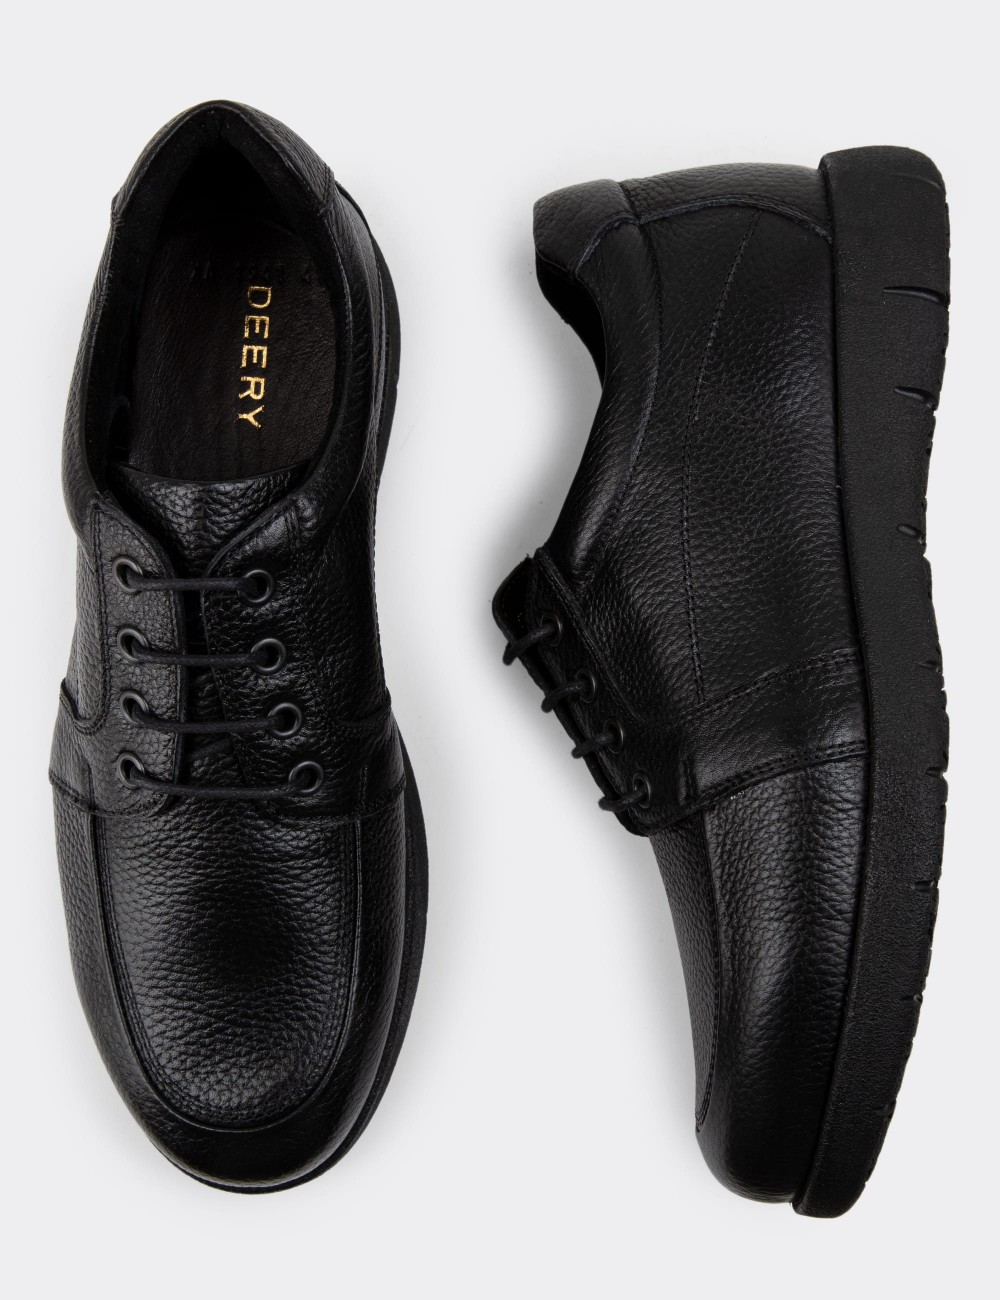 Black Leather Lace-up Shoes - 01940MSYHC01